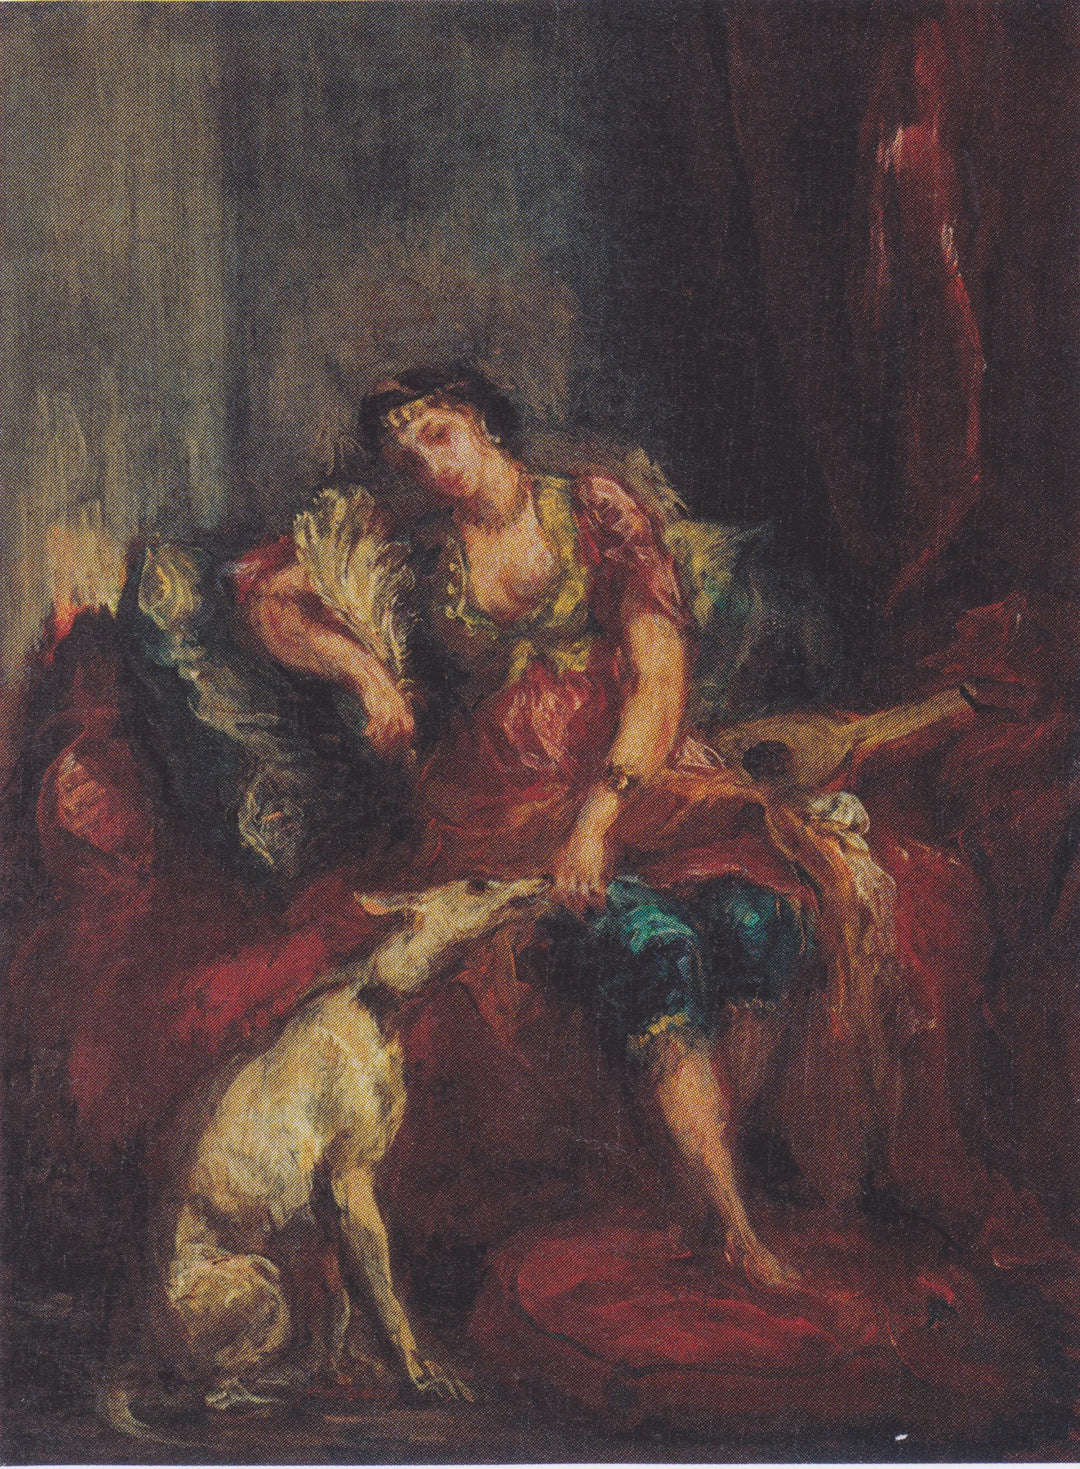 Woman from Algiers with Windhund by Eugène Delacroix Reproduction Painting by Blue Surf Art